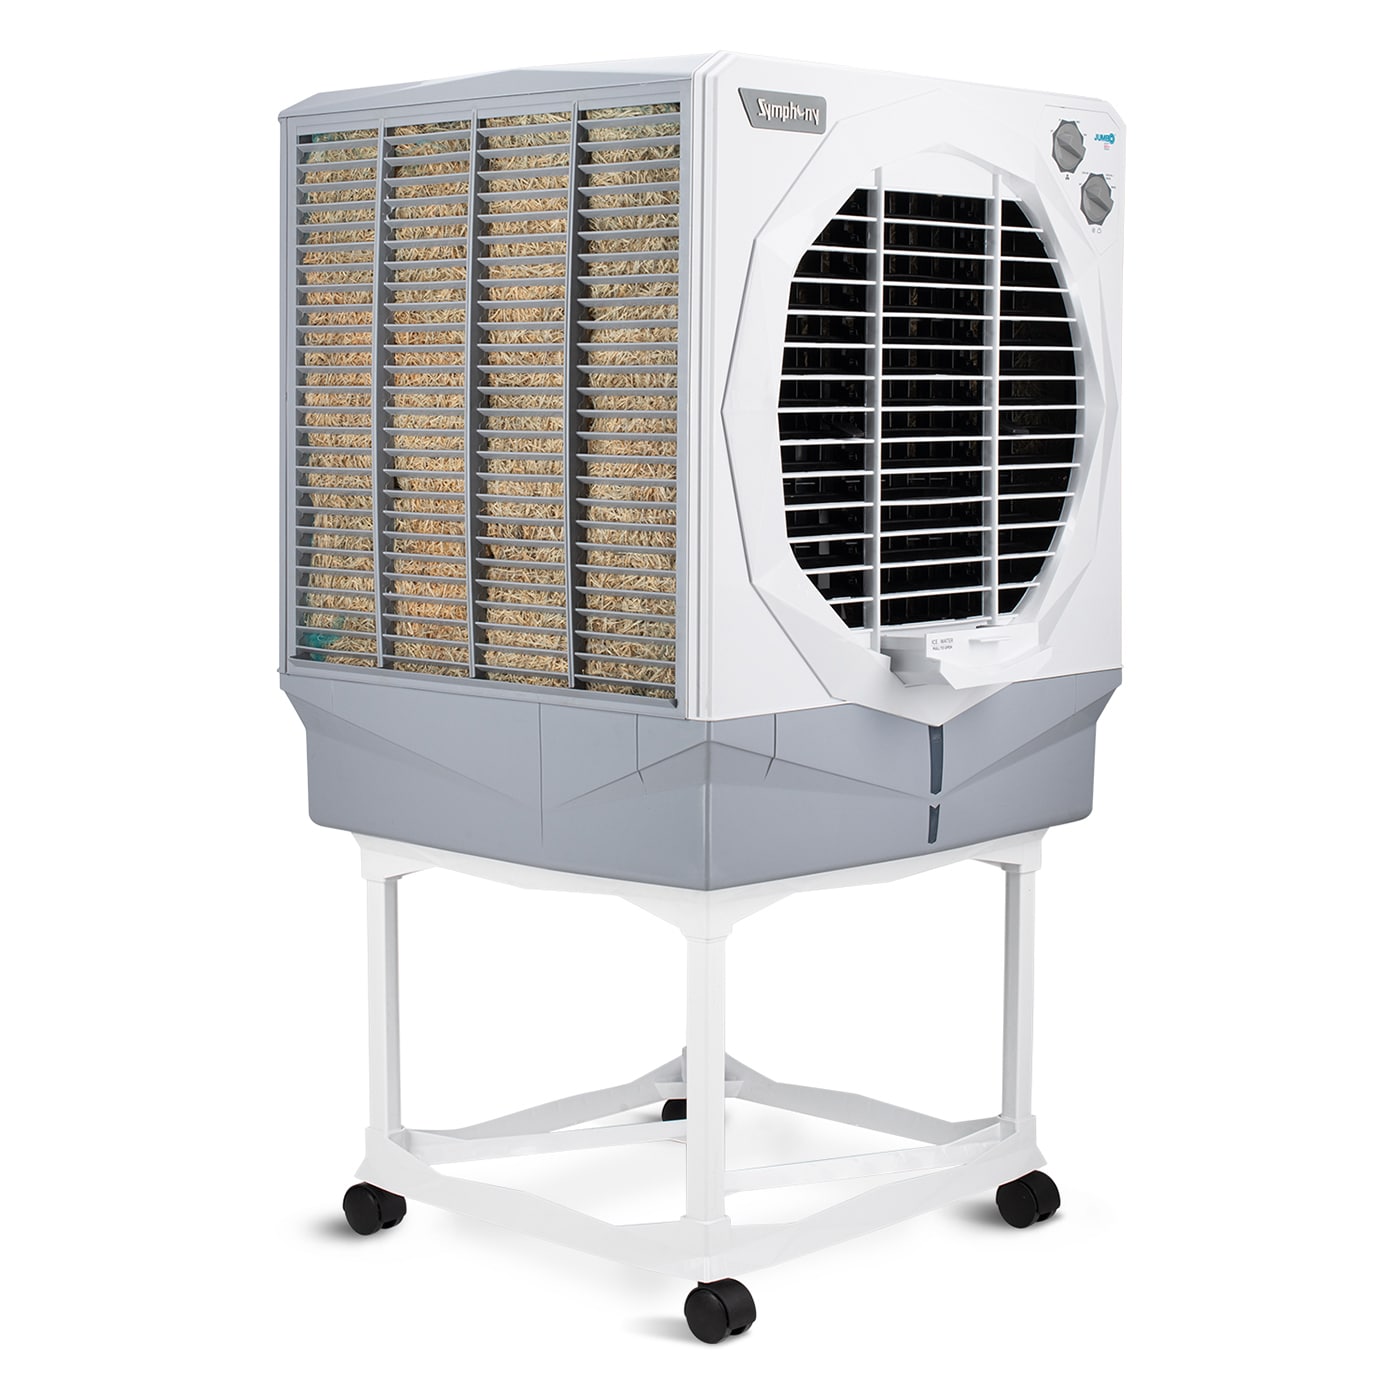 Powerful desert air cooler for efficient cooling